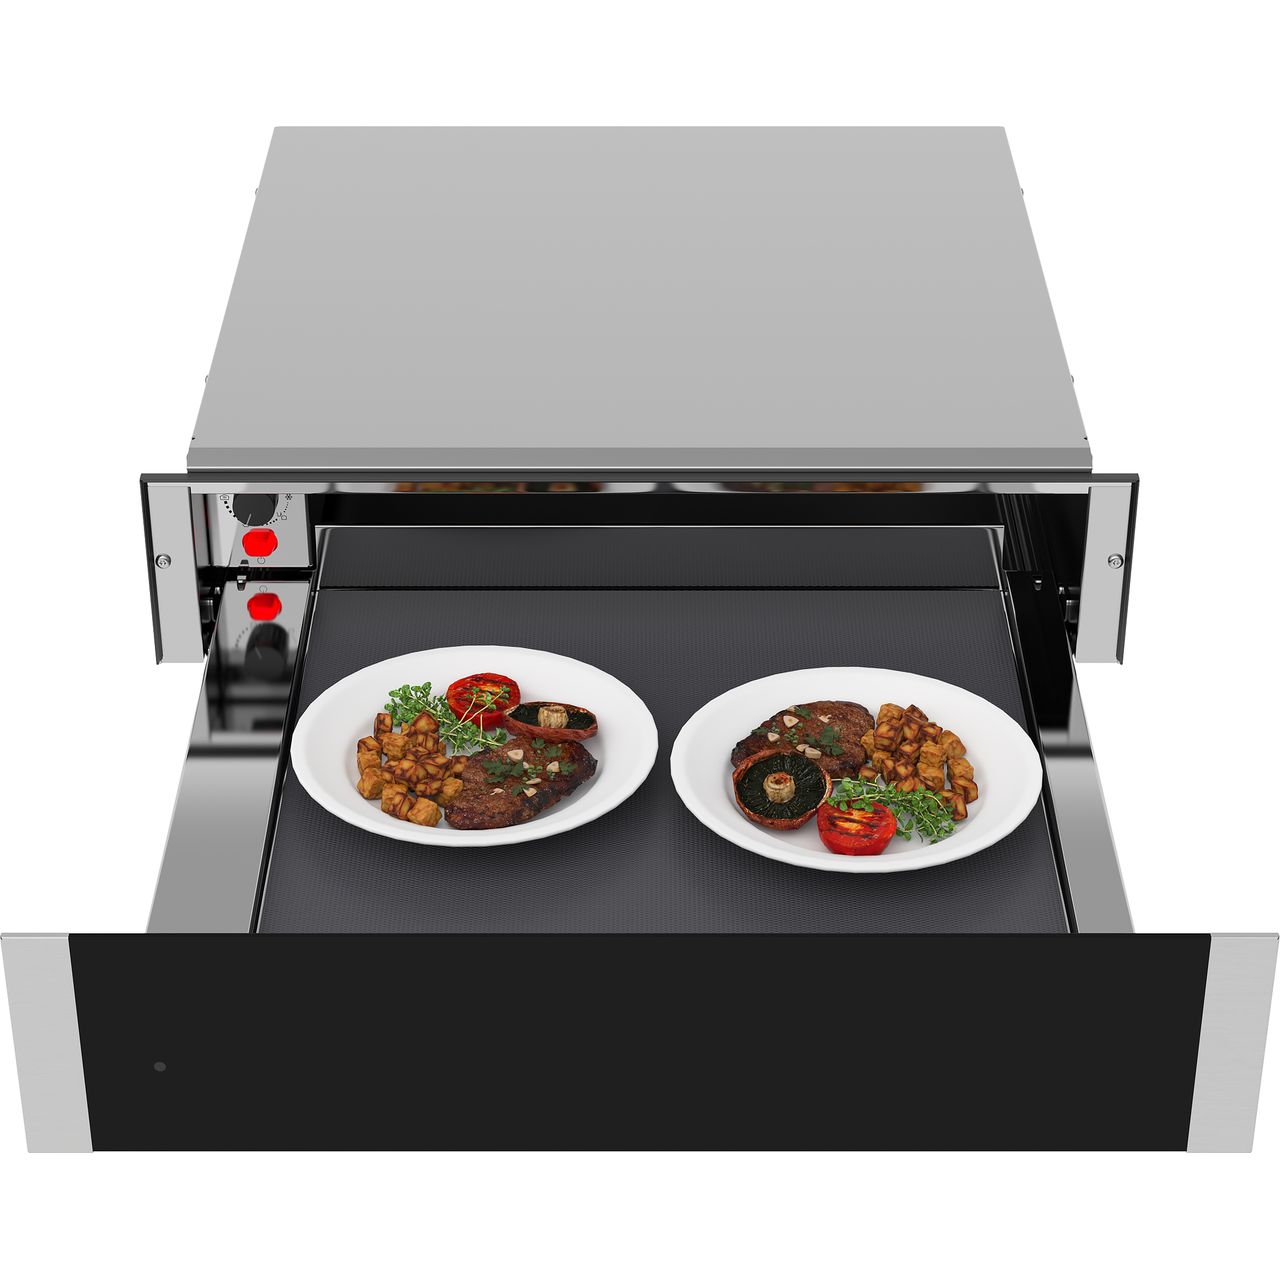 Samsung Chef Collection NL20J7100WB Built In Warming Drawer Review